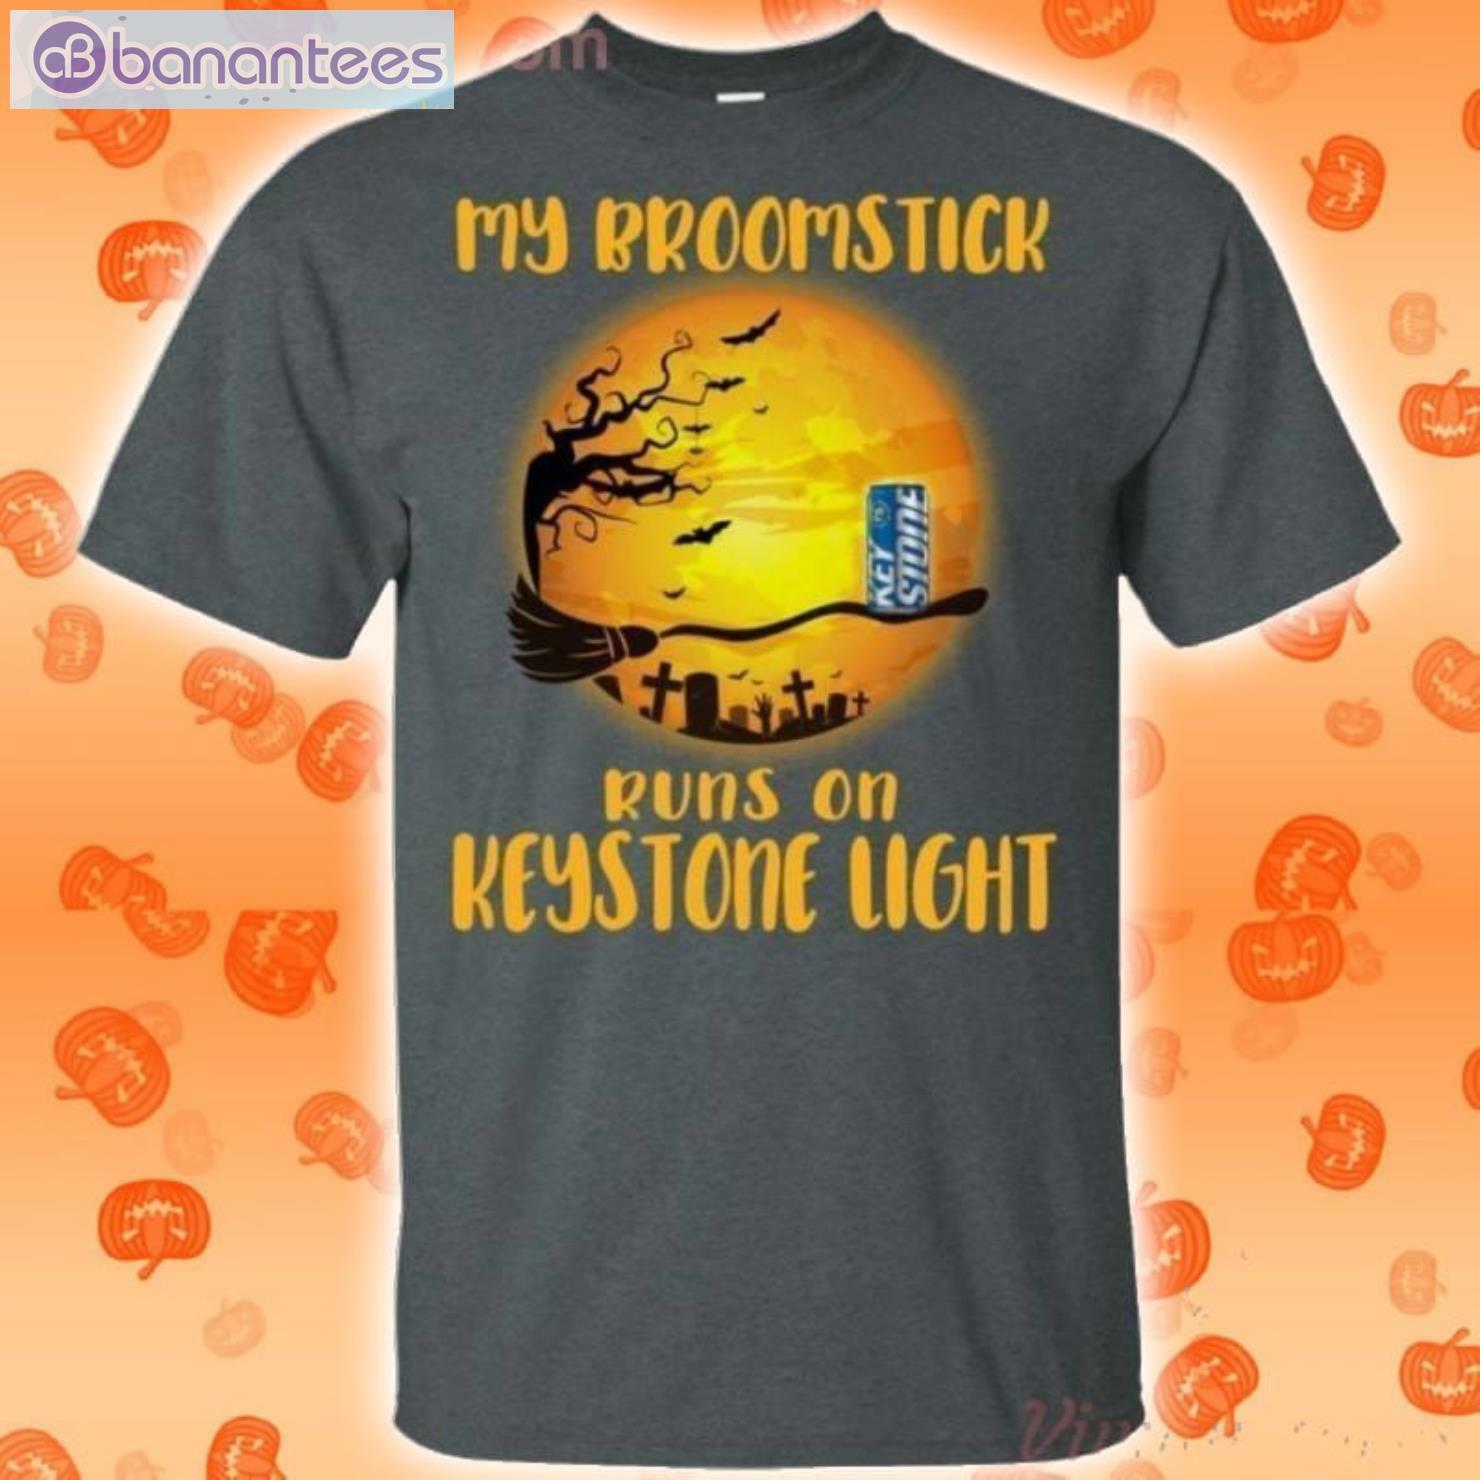 My Broomstick Runs On Keystone Light Funny Beer Halloween T-Shirt Product Photo 2 Product photo 2